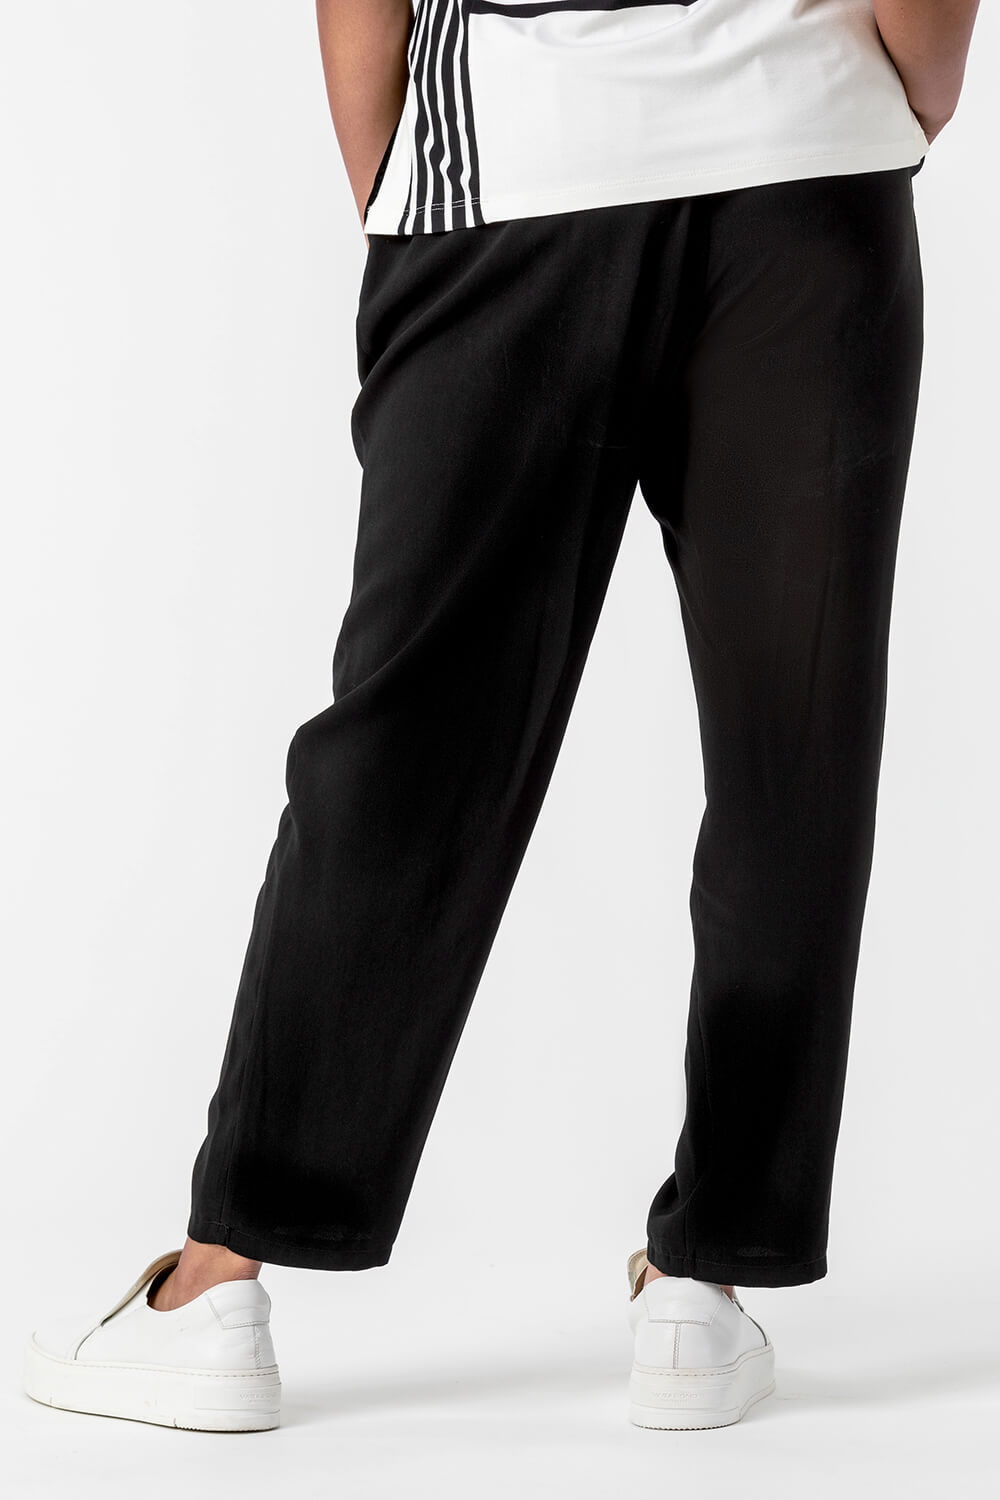 Black Curve 29" Tie Front Joggers, Image 5 of 5